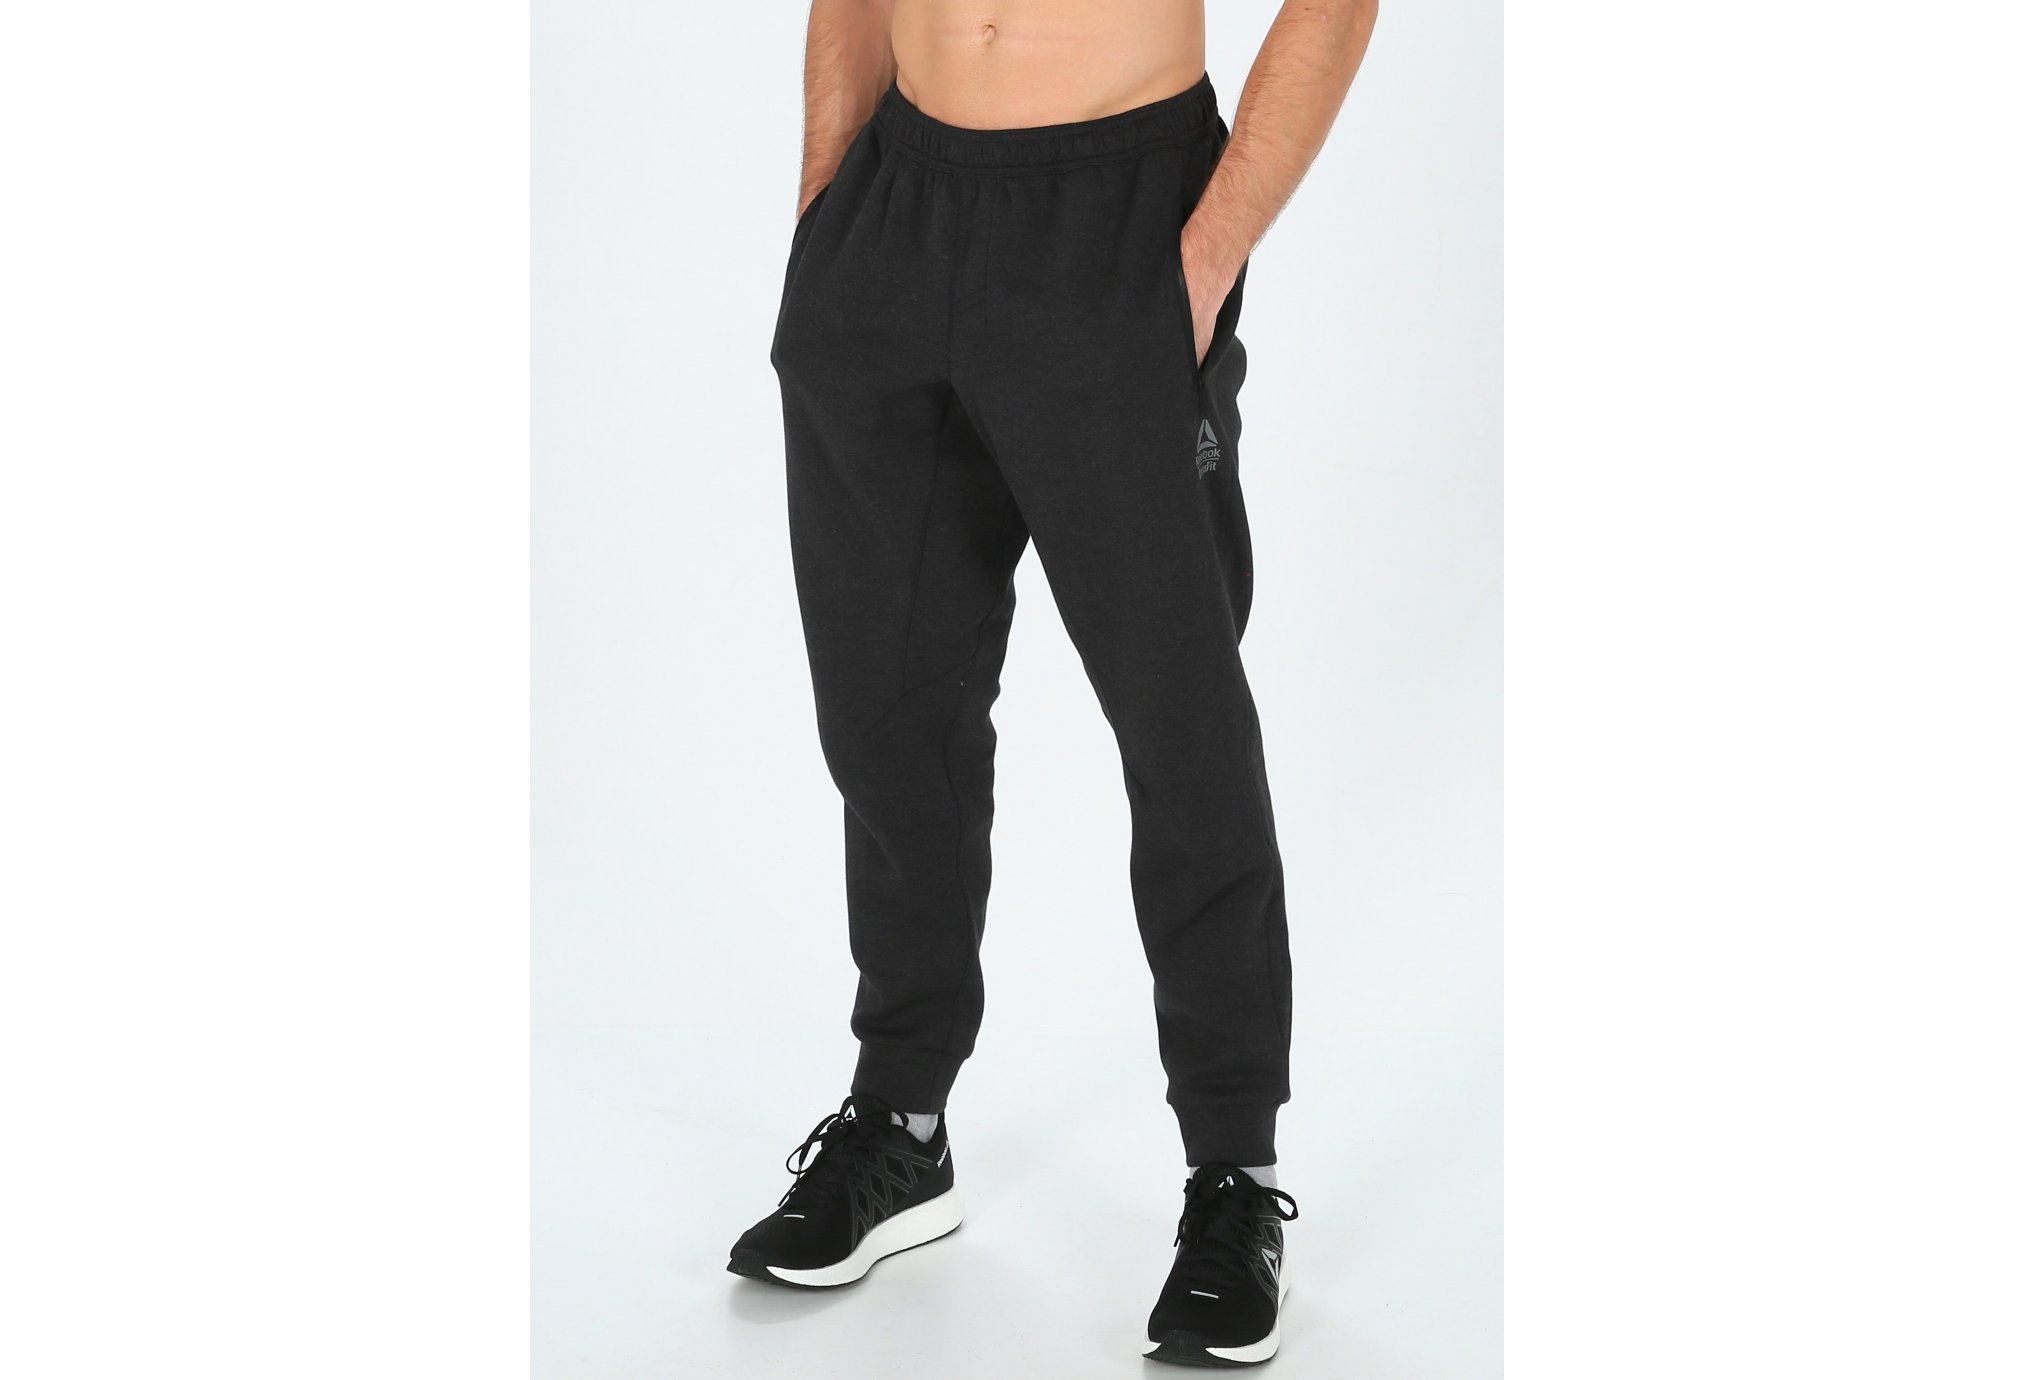 Reebok Crossfit double knit m vtement running homme